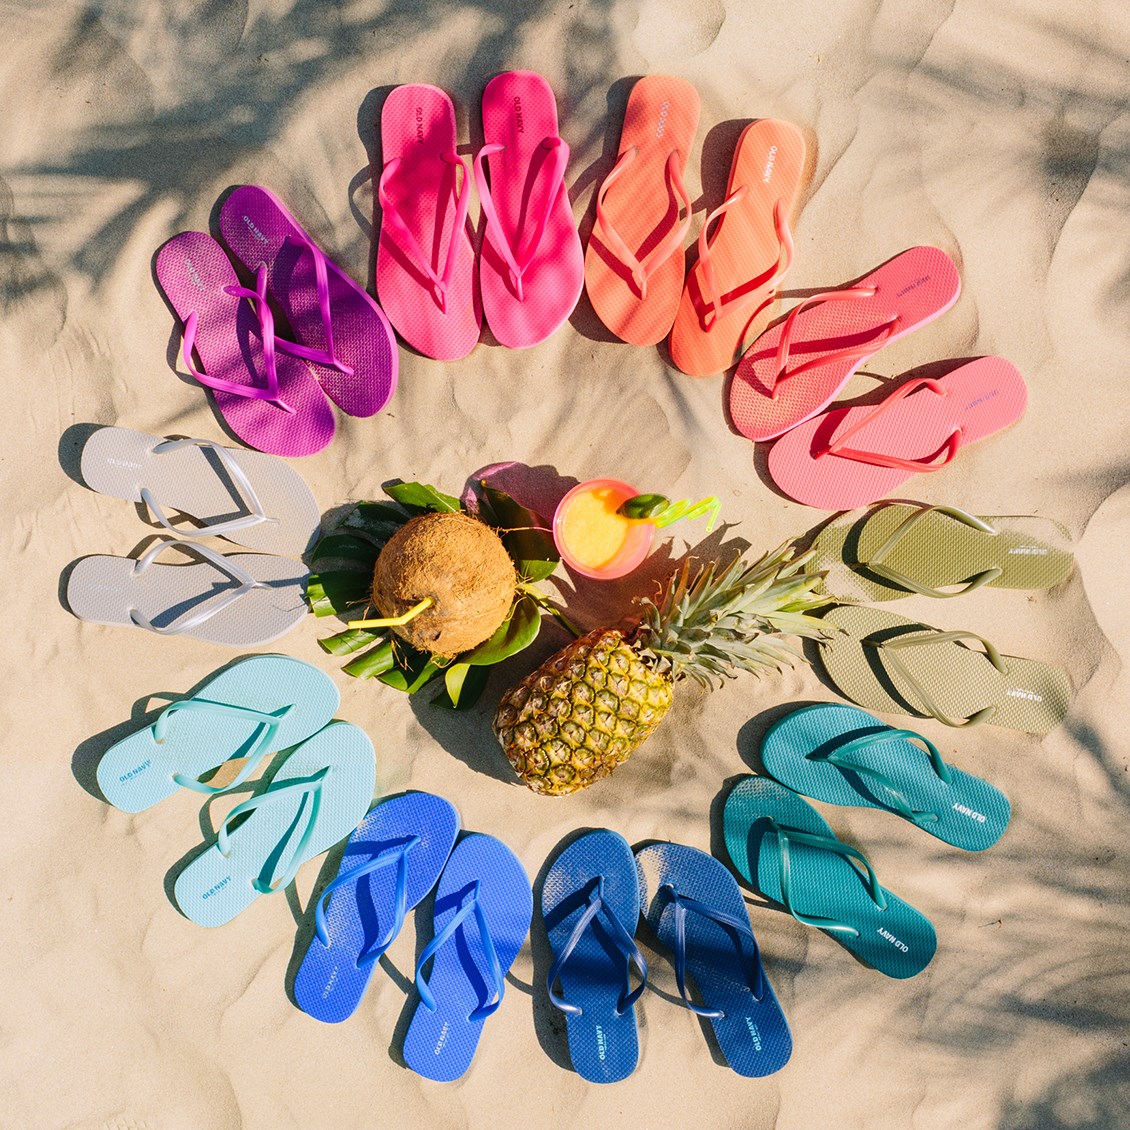 Today only: Free flip flops with $35 in-store purchase